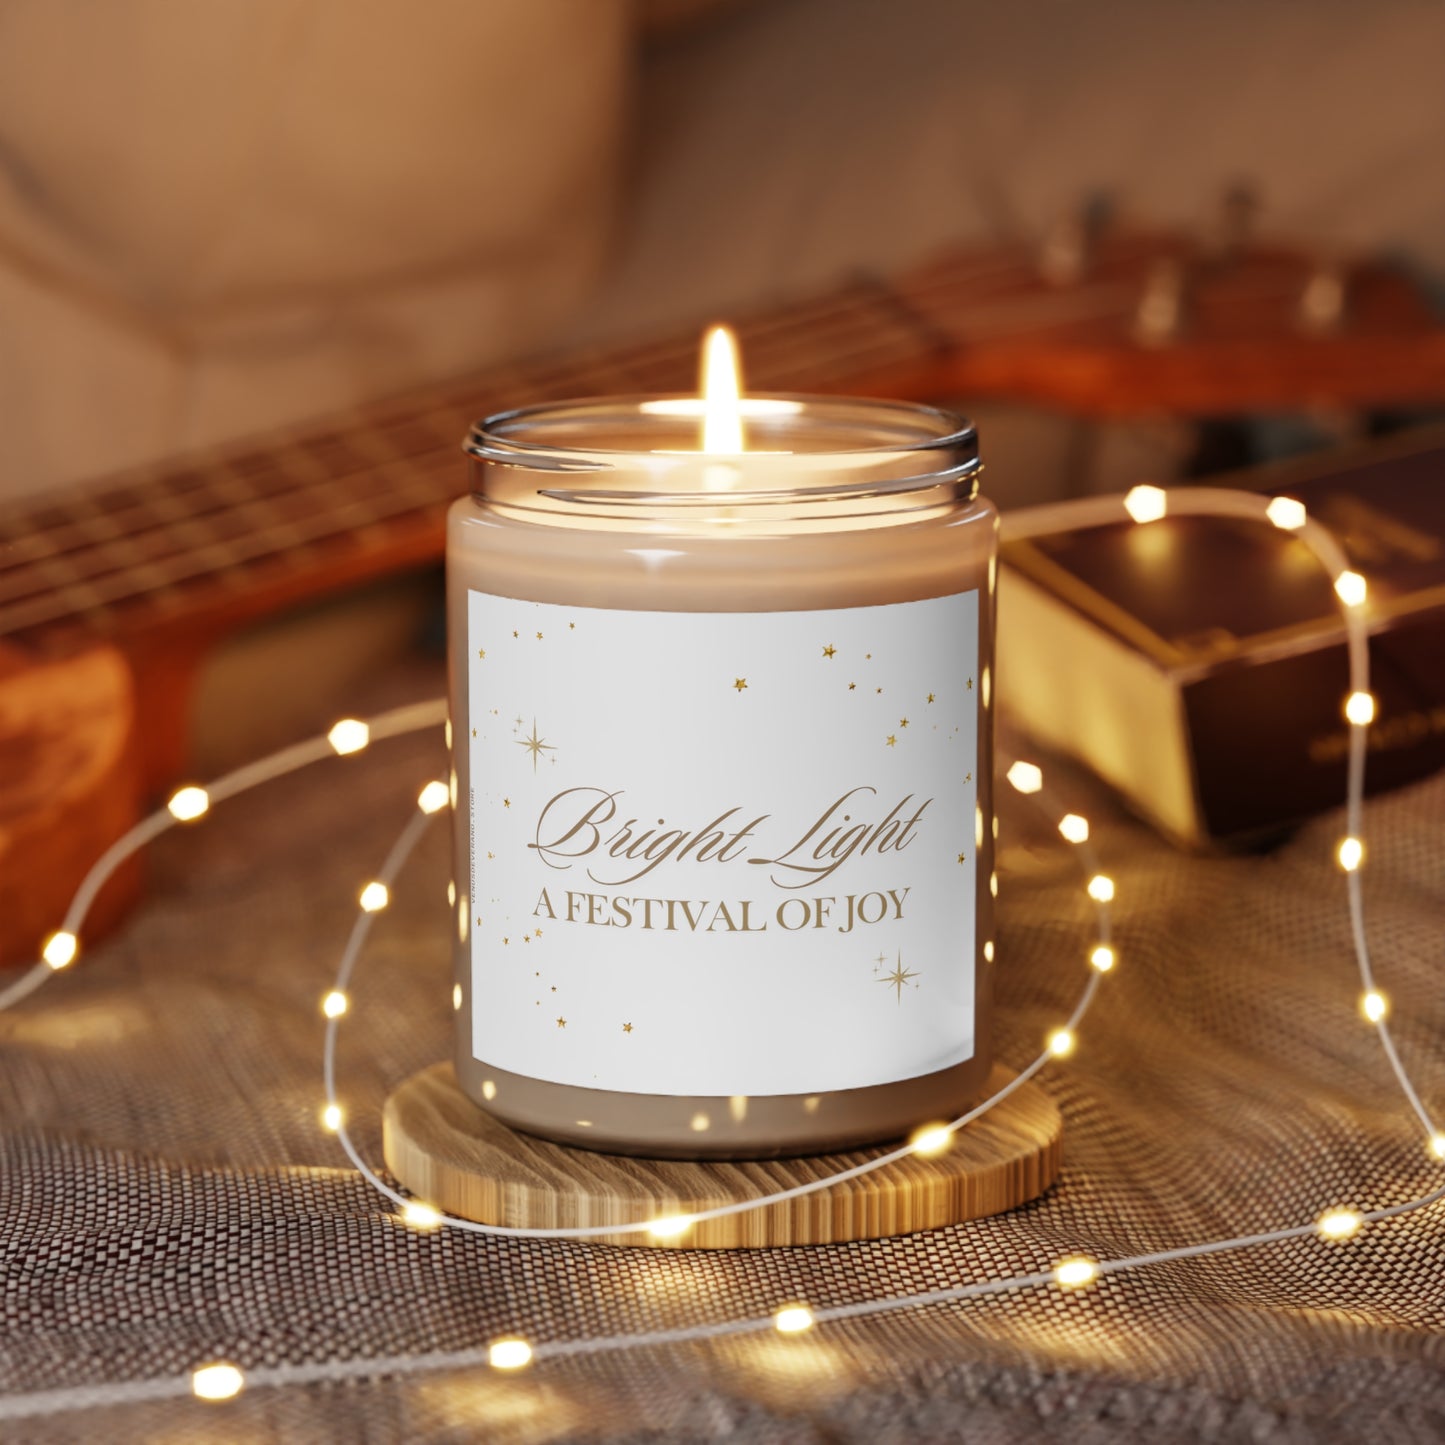 Scented Candle, 9oz - Bright light, a festival of JOY - Made from vegan soy coconut wax, hand-poured | 2 ambrosial fragrances available, Cinnamon Stick and Vanilla.